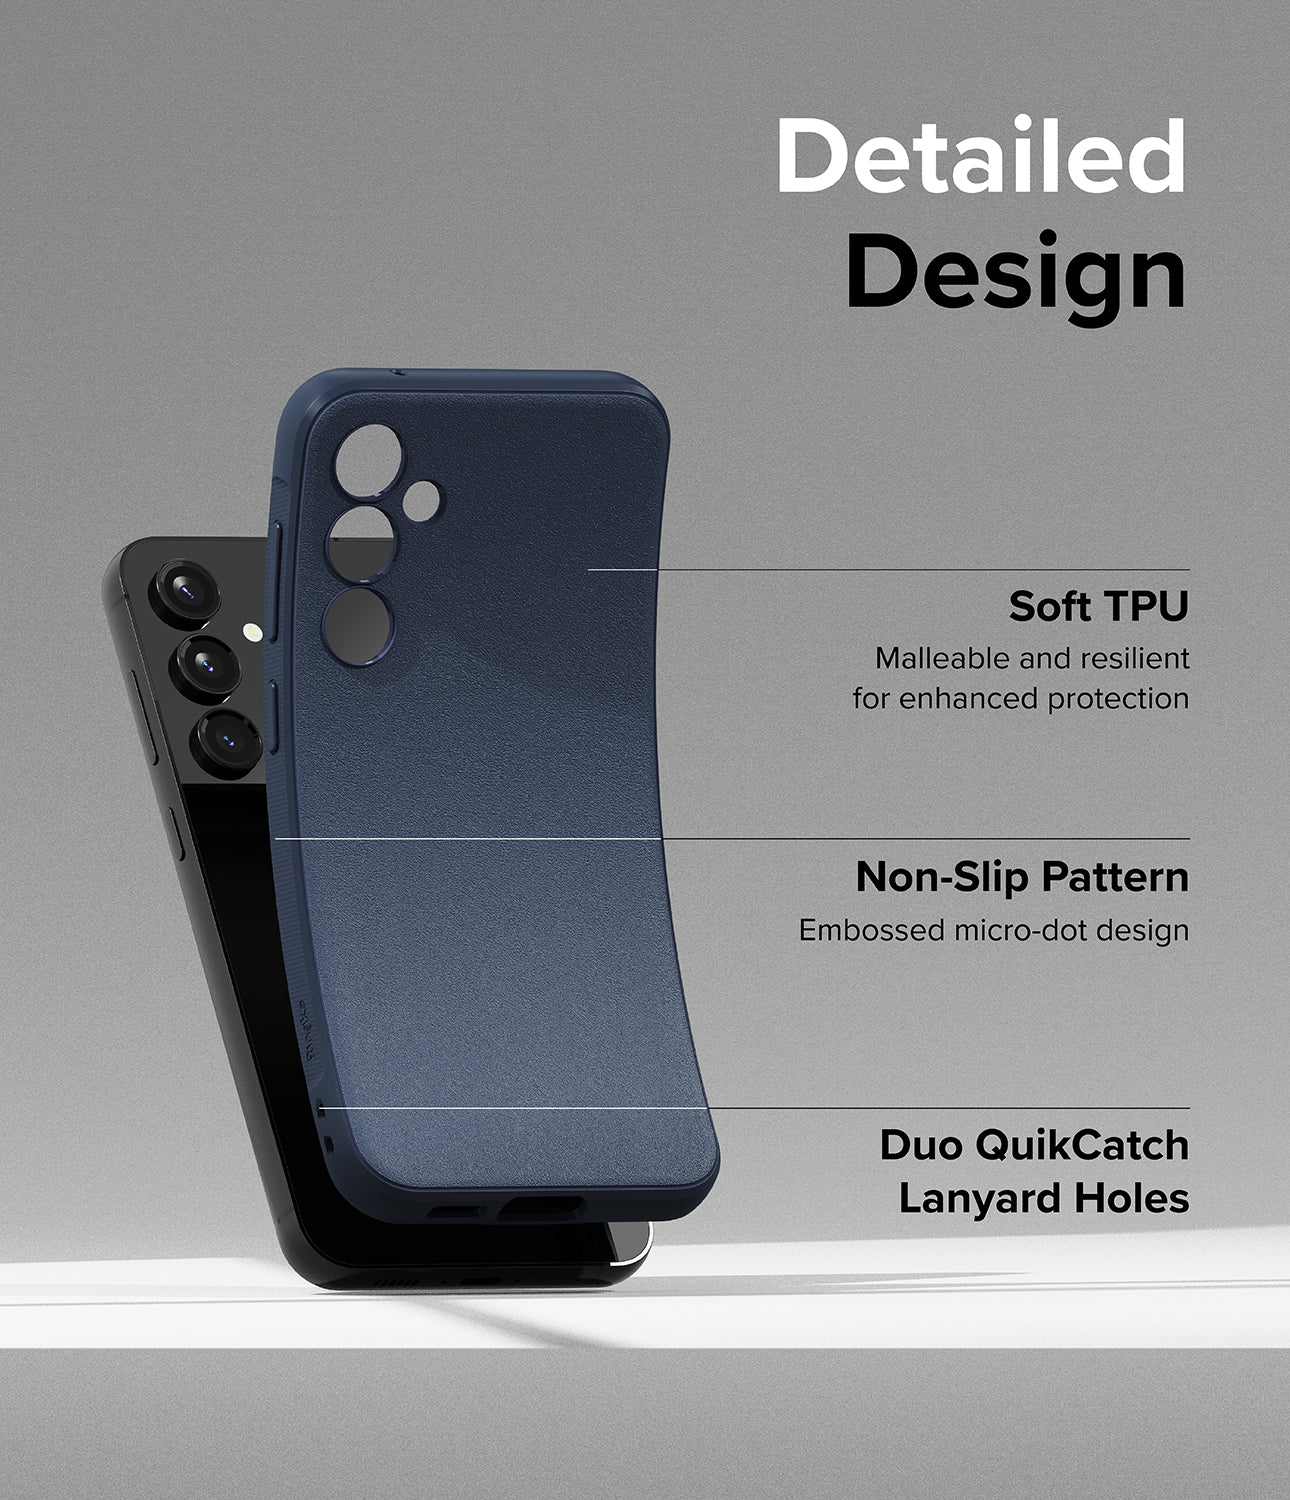 Galaxy S23 FE Case | Onyx-Navy - Detailed Design. Malleable and resilient for enhanced protection with Soft TPU. Embossed micro-dot design with Non-Slip Pattern. Duo QuikCatch Lanyard Holes